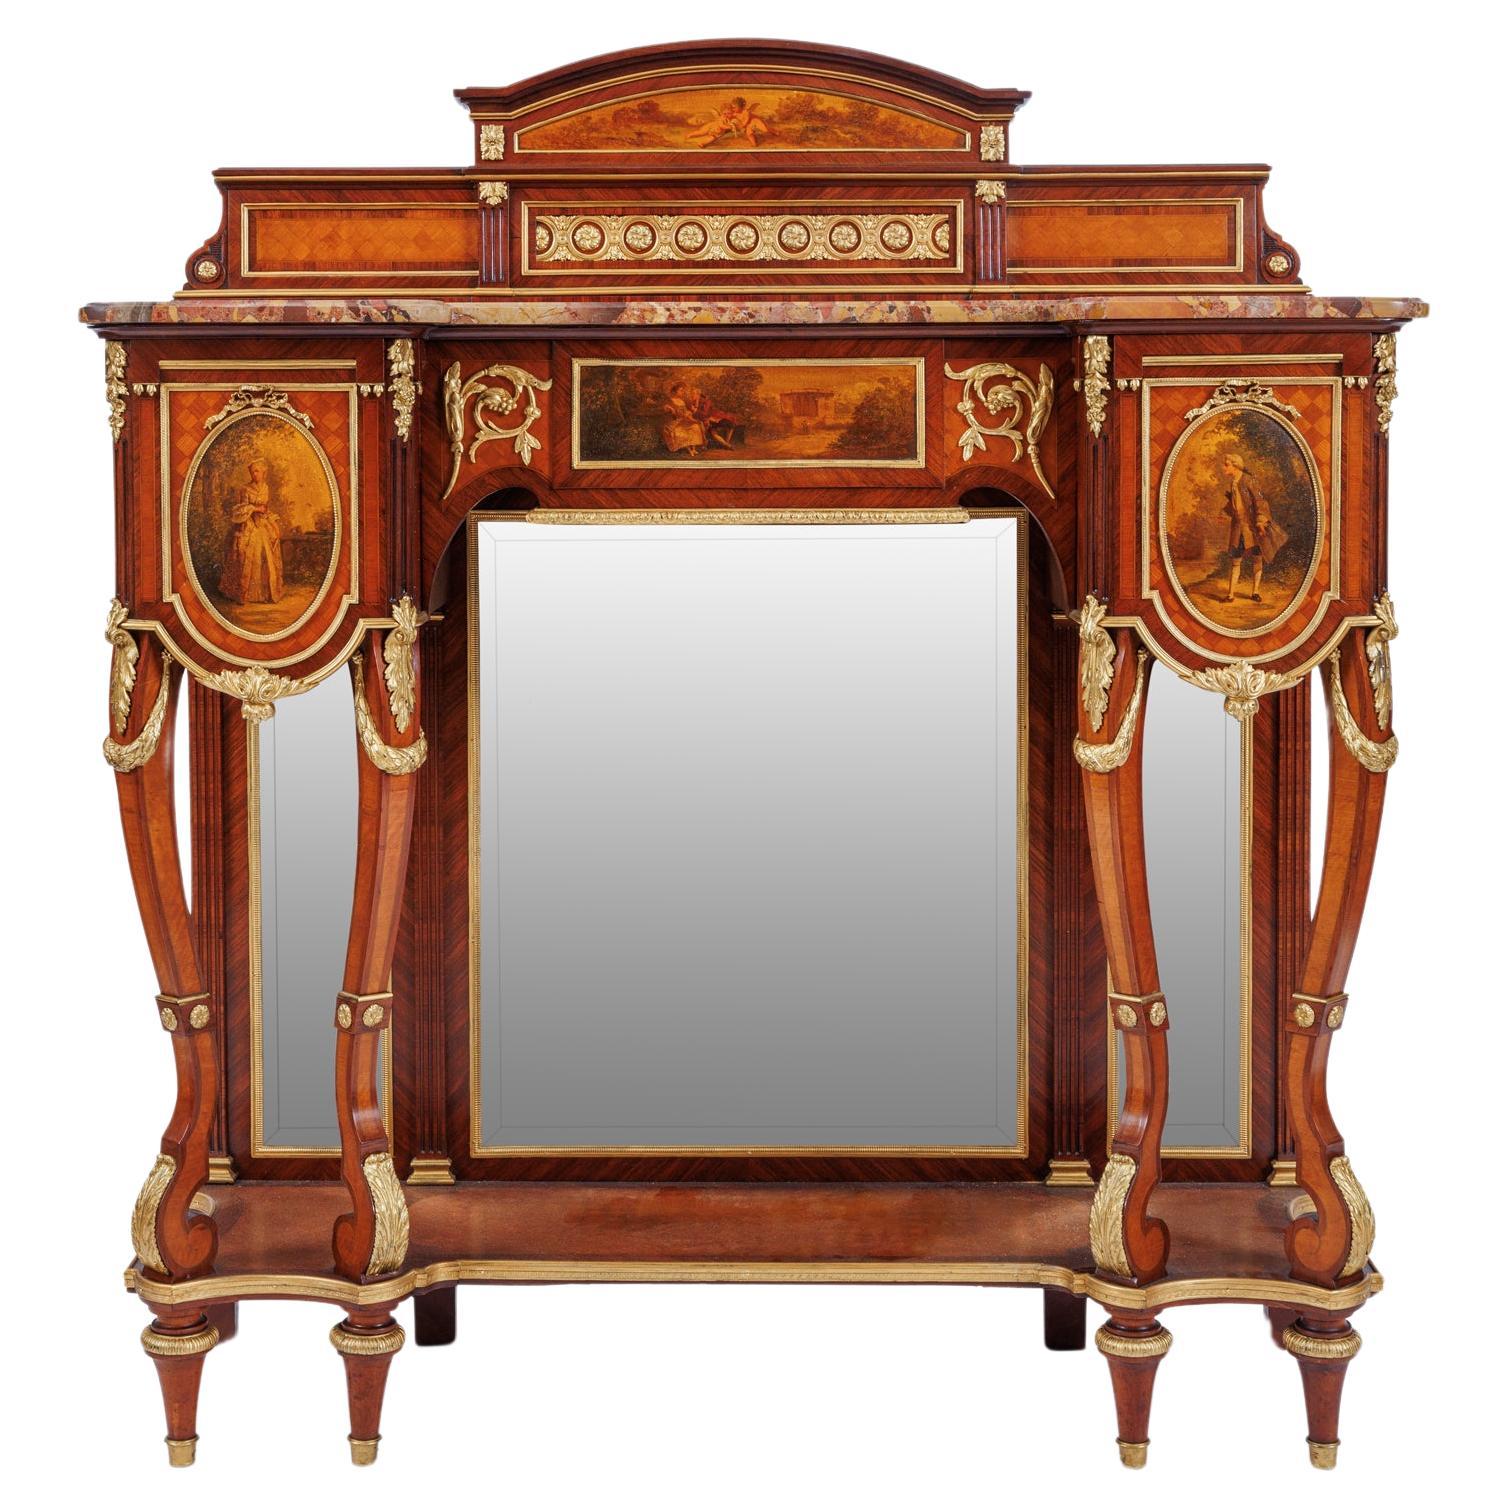 A French Ormolu Mounted Kingwood and Vernis Martin Console Table, Circa 1880 For Sale